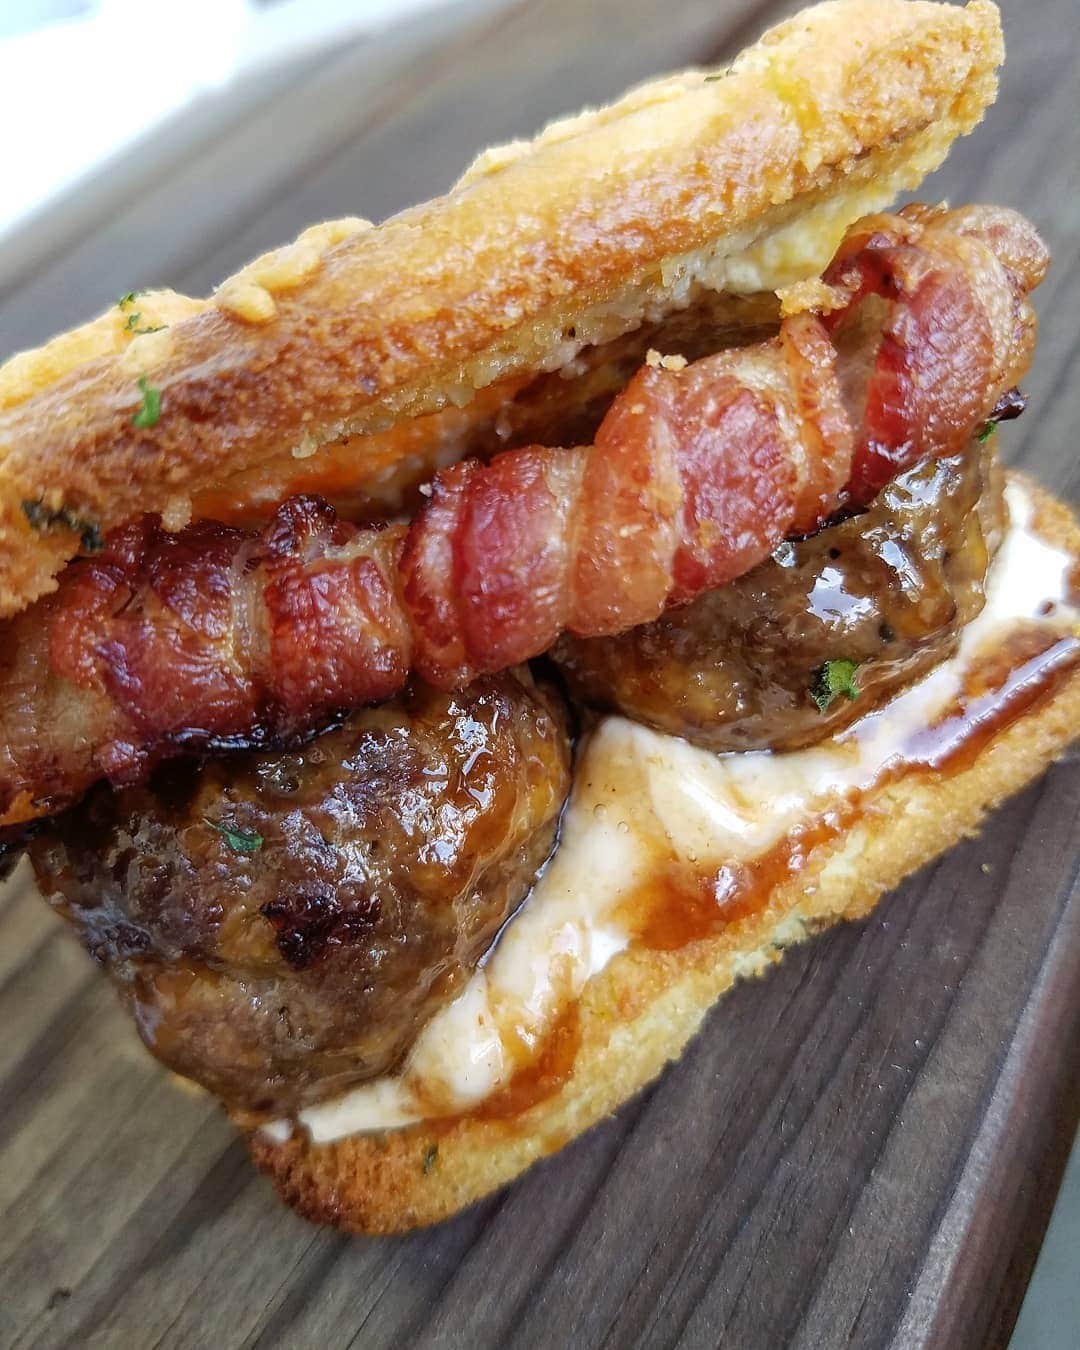 Flavorgod Seasoningsさんのインスタグラム写真 - (Flavorgod SeasoningsInstagram)「🥓 Ultimate Meatball Sliders 🥓⁠ -⁠ Customer:👉 @lowkarbkhaleesi⁠ Seasoned with:👉 #Flavorgod ranch seasoning⁠ -⁠ Add delicious flavors to any meal!⬇⁠ Click the link in my bio @flavorgod⁠ ✅www.flavorgod.com⁠ -⁠ Sweet BBQ meatballs, cream cheese, & bacon wrapped onion rings on a toasted bun #yourewelcome⁠ .⁠ .⁠ Meatballs:⁠ 1 lb ground beef⁠ 1/2 cup shredded cheese⁠ 1 egg⁠ 1 Tbsp @FlavorGod ranch seasoning⁠ 1/4 tsp black pepper⁠ ▪▪▪⁠ Mix all together until evenly combined. Roll into 12 meatballs. Bake on a greased cookie sheet at 375° for 30 minutes. Toss in your favorite sugarfree BBQ sauce. I used some J Dawg sweet sauce 》let me know in the comments if you want the recipe 👇⁠ .⁠ .⁠ Onion Rings:⁠ 1/2 onion, sliced into rings⁠ 8 strips bacon⁠ ▪▪▪⁠ Cut bacon in half lengthwise making long thin strips. Wrap around onion rings. Place on a greased tin foil covered cookie sheet and bake at 425° for 30 minutes or until crispy⁠ .⁠ .⁠ The bread recipe I used is from @Low.carb.love 👉 it is listed in her highlights under "almond buns". The taste was great but had more of a crumbly texture. I think next time I will use a chaffle!⁠ -⁠ Flavor God Seasonings are:⁠ ✅ZERO CALORIES PER SERVING⁠ ✅MADE FRESH⁠ ✅MADE LOCALLY IN US⁠ ✅FREE GIFTS AT CHECKOUT⁠ ✅GLUTEN FREE⁠ ✅#PALEO & #KETO FRIENDLY⁠ -⁠ #food #foodie #flavorgod #seasonings #glutenfree #mealprep #seasonings #breakfast #lunch #dinner #yummy #delicious #foodporn」1月16日 11時01分 - flavorgod